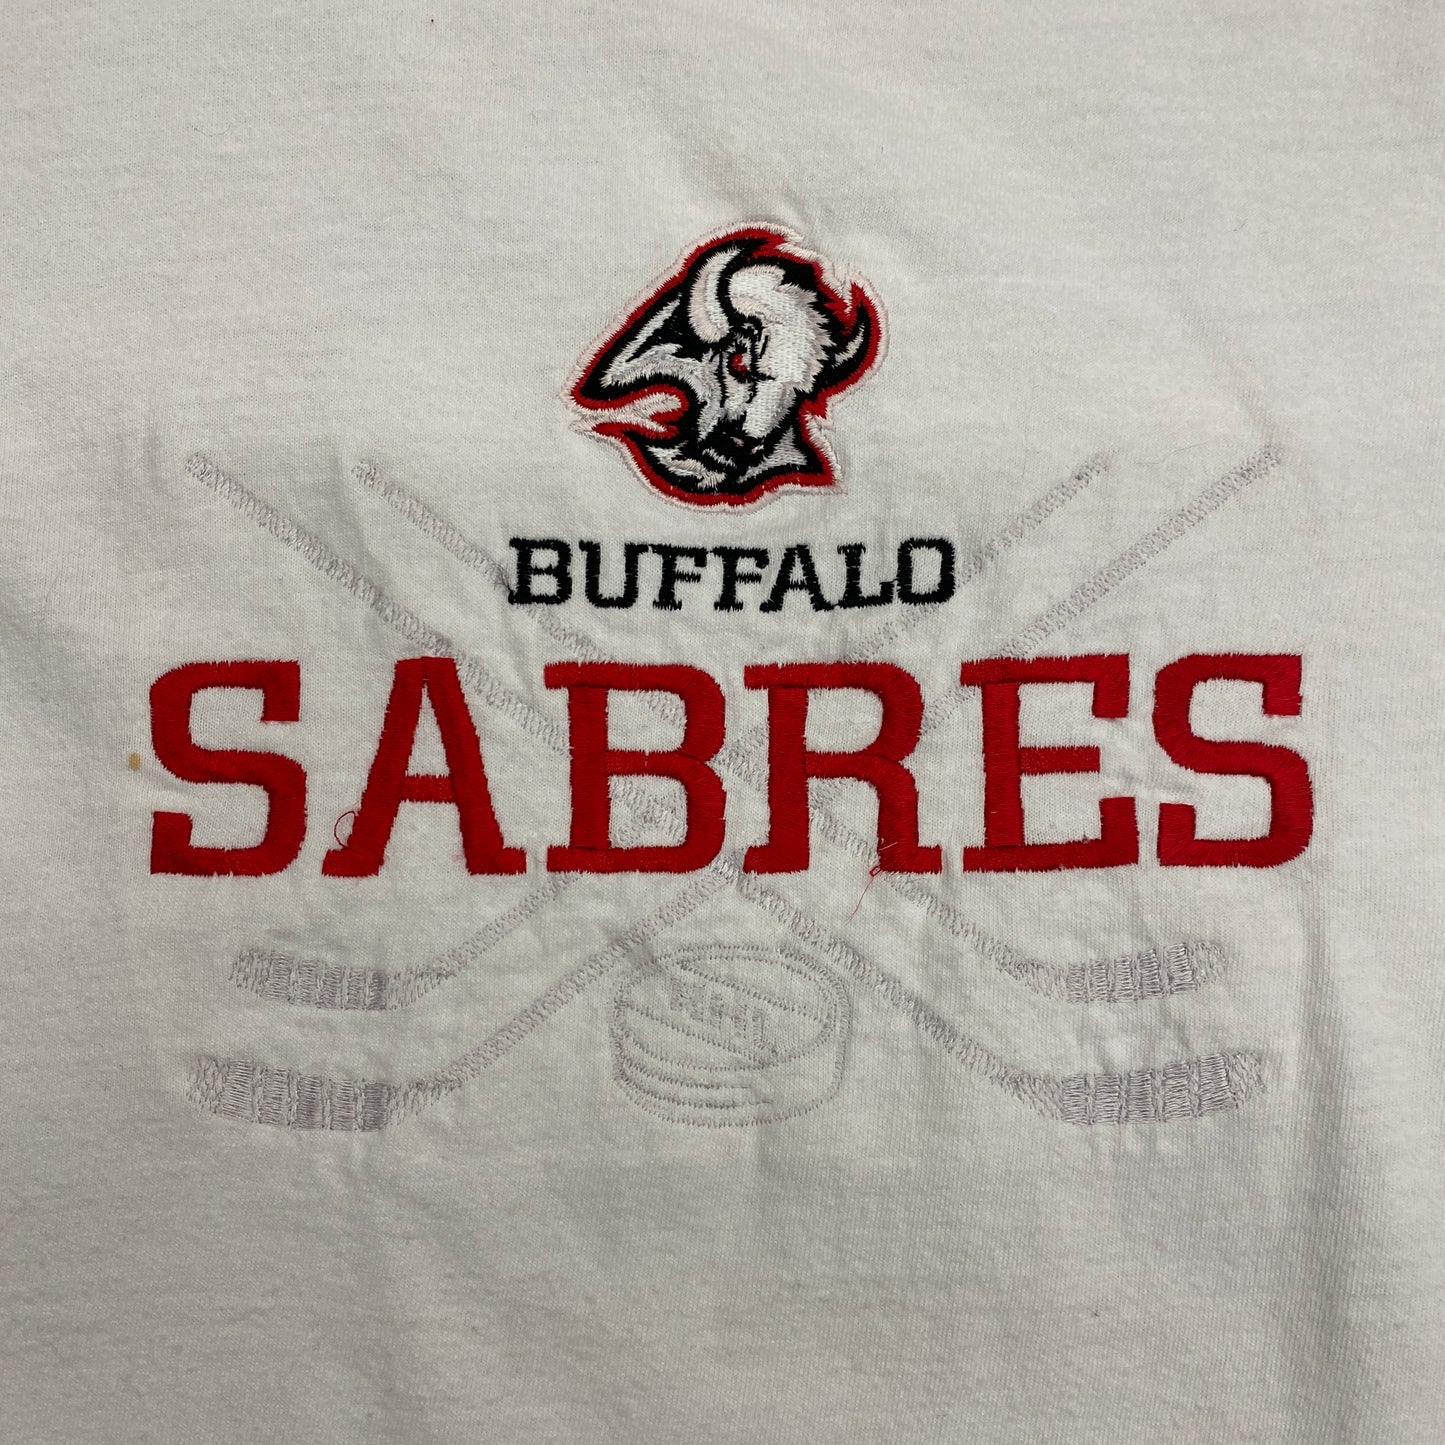 1990s Buffalo Sabres Hockey "Goat Head Logo" Embroidered Tee - Size Large